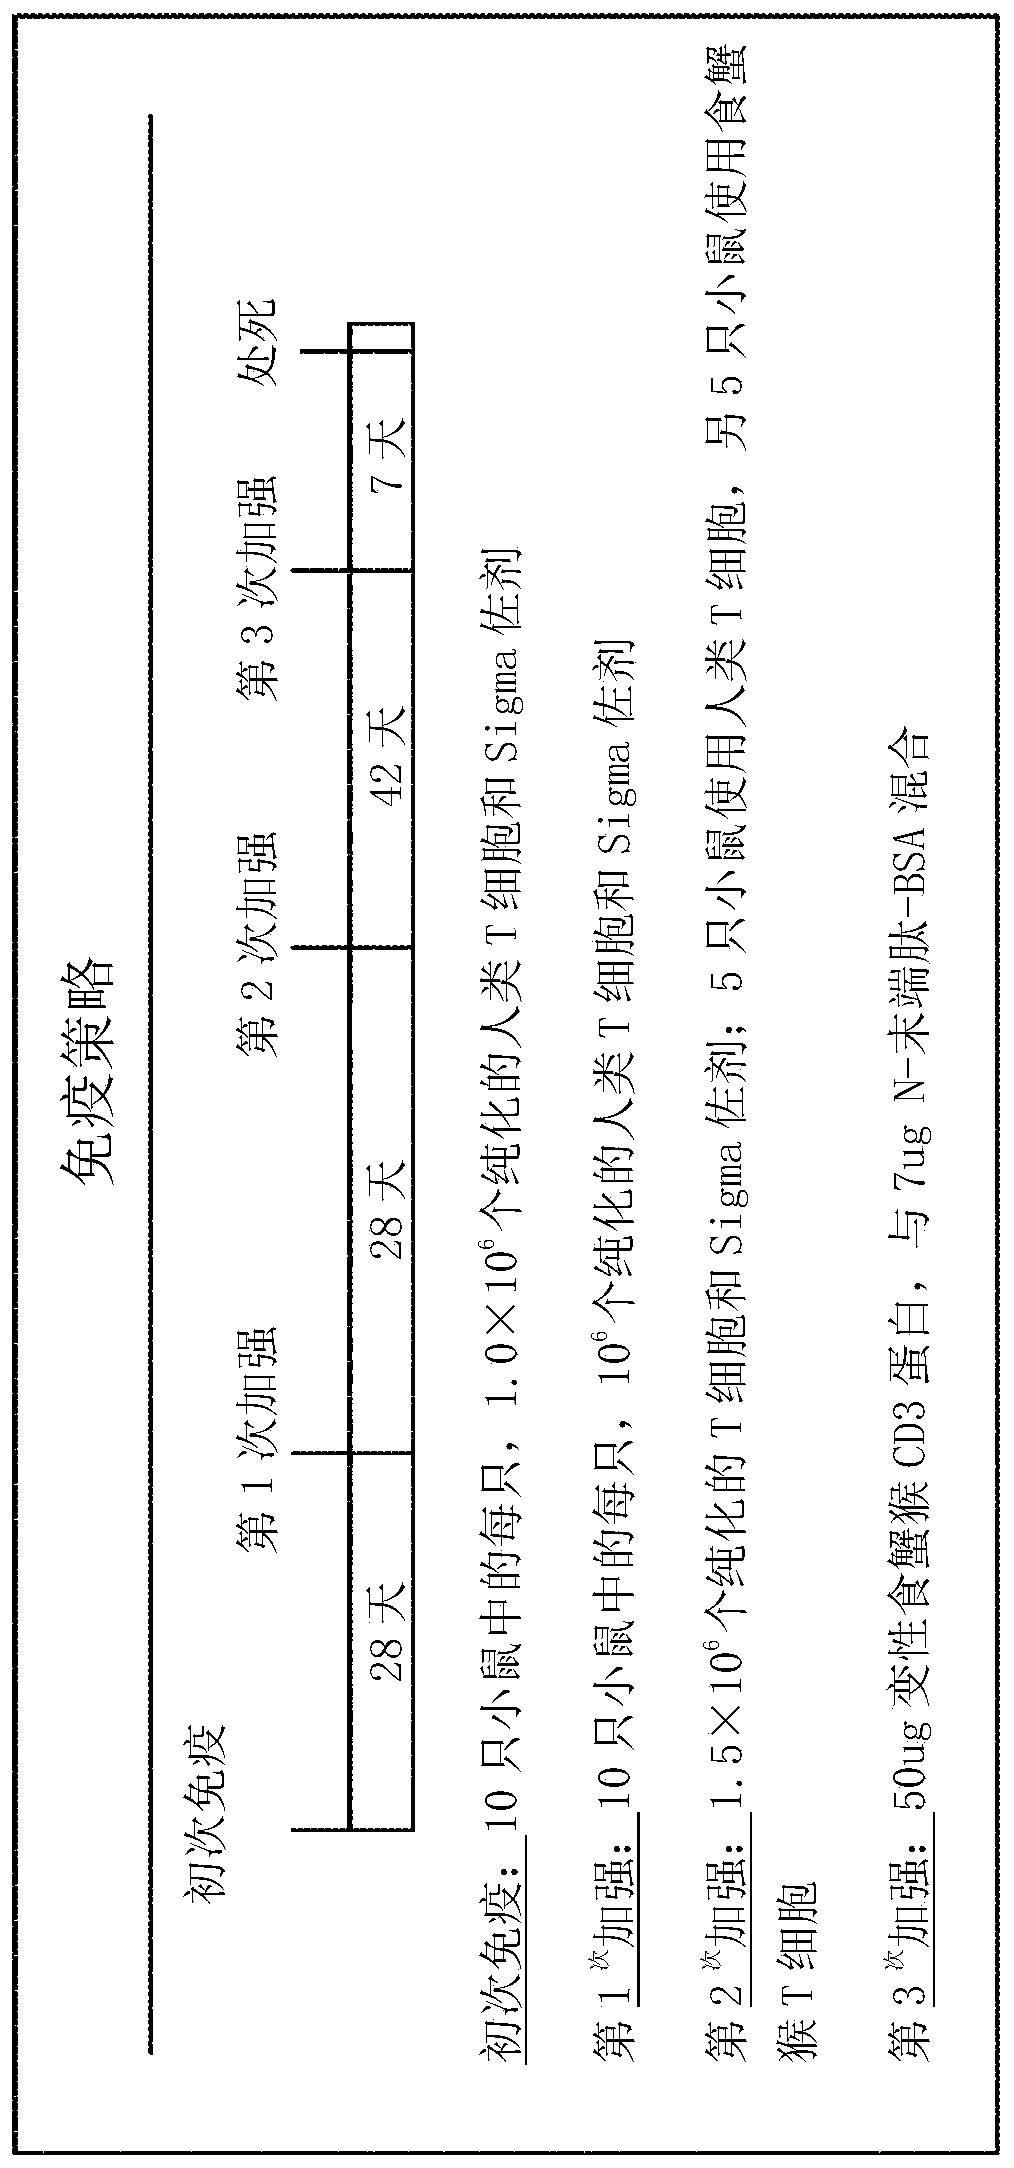 Anti-cd3-binding domains and antibodies comprising them, and methods for their generation and use